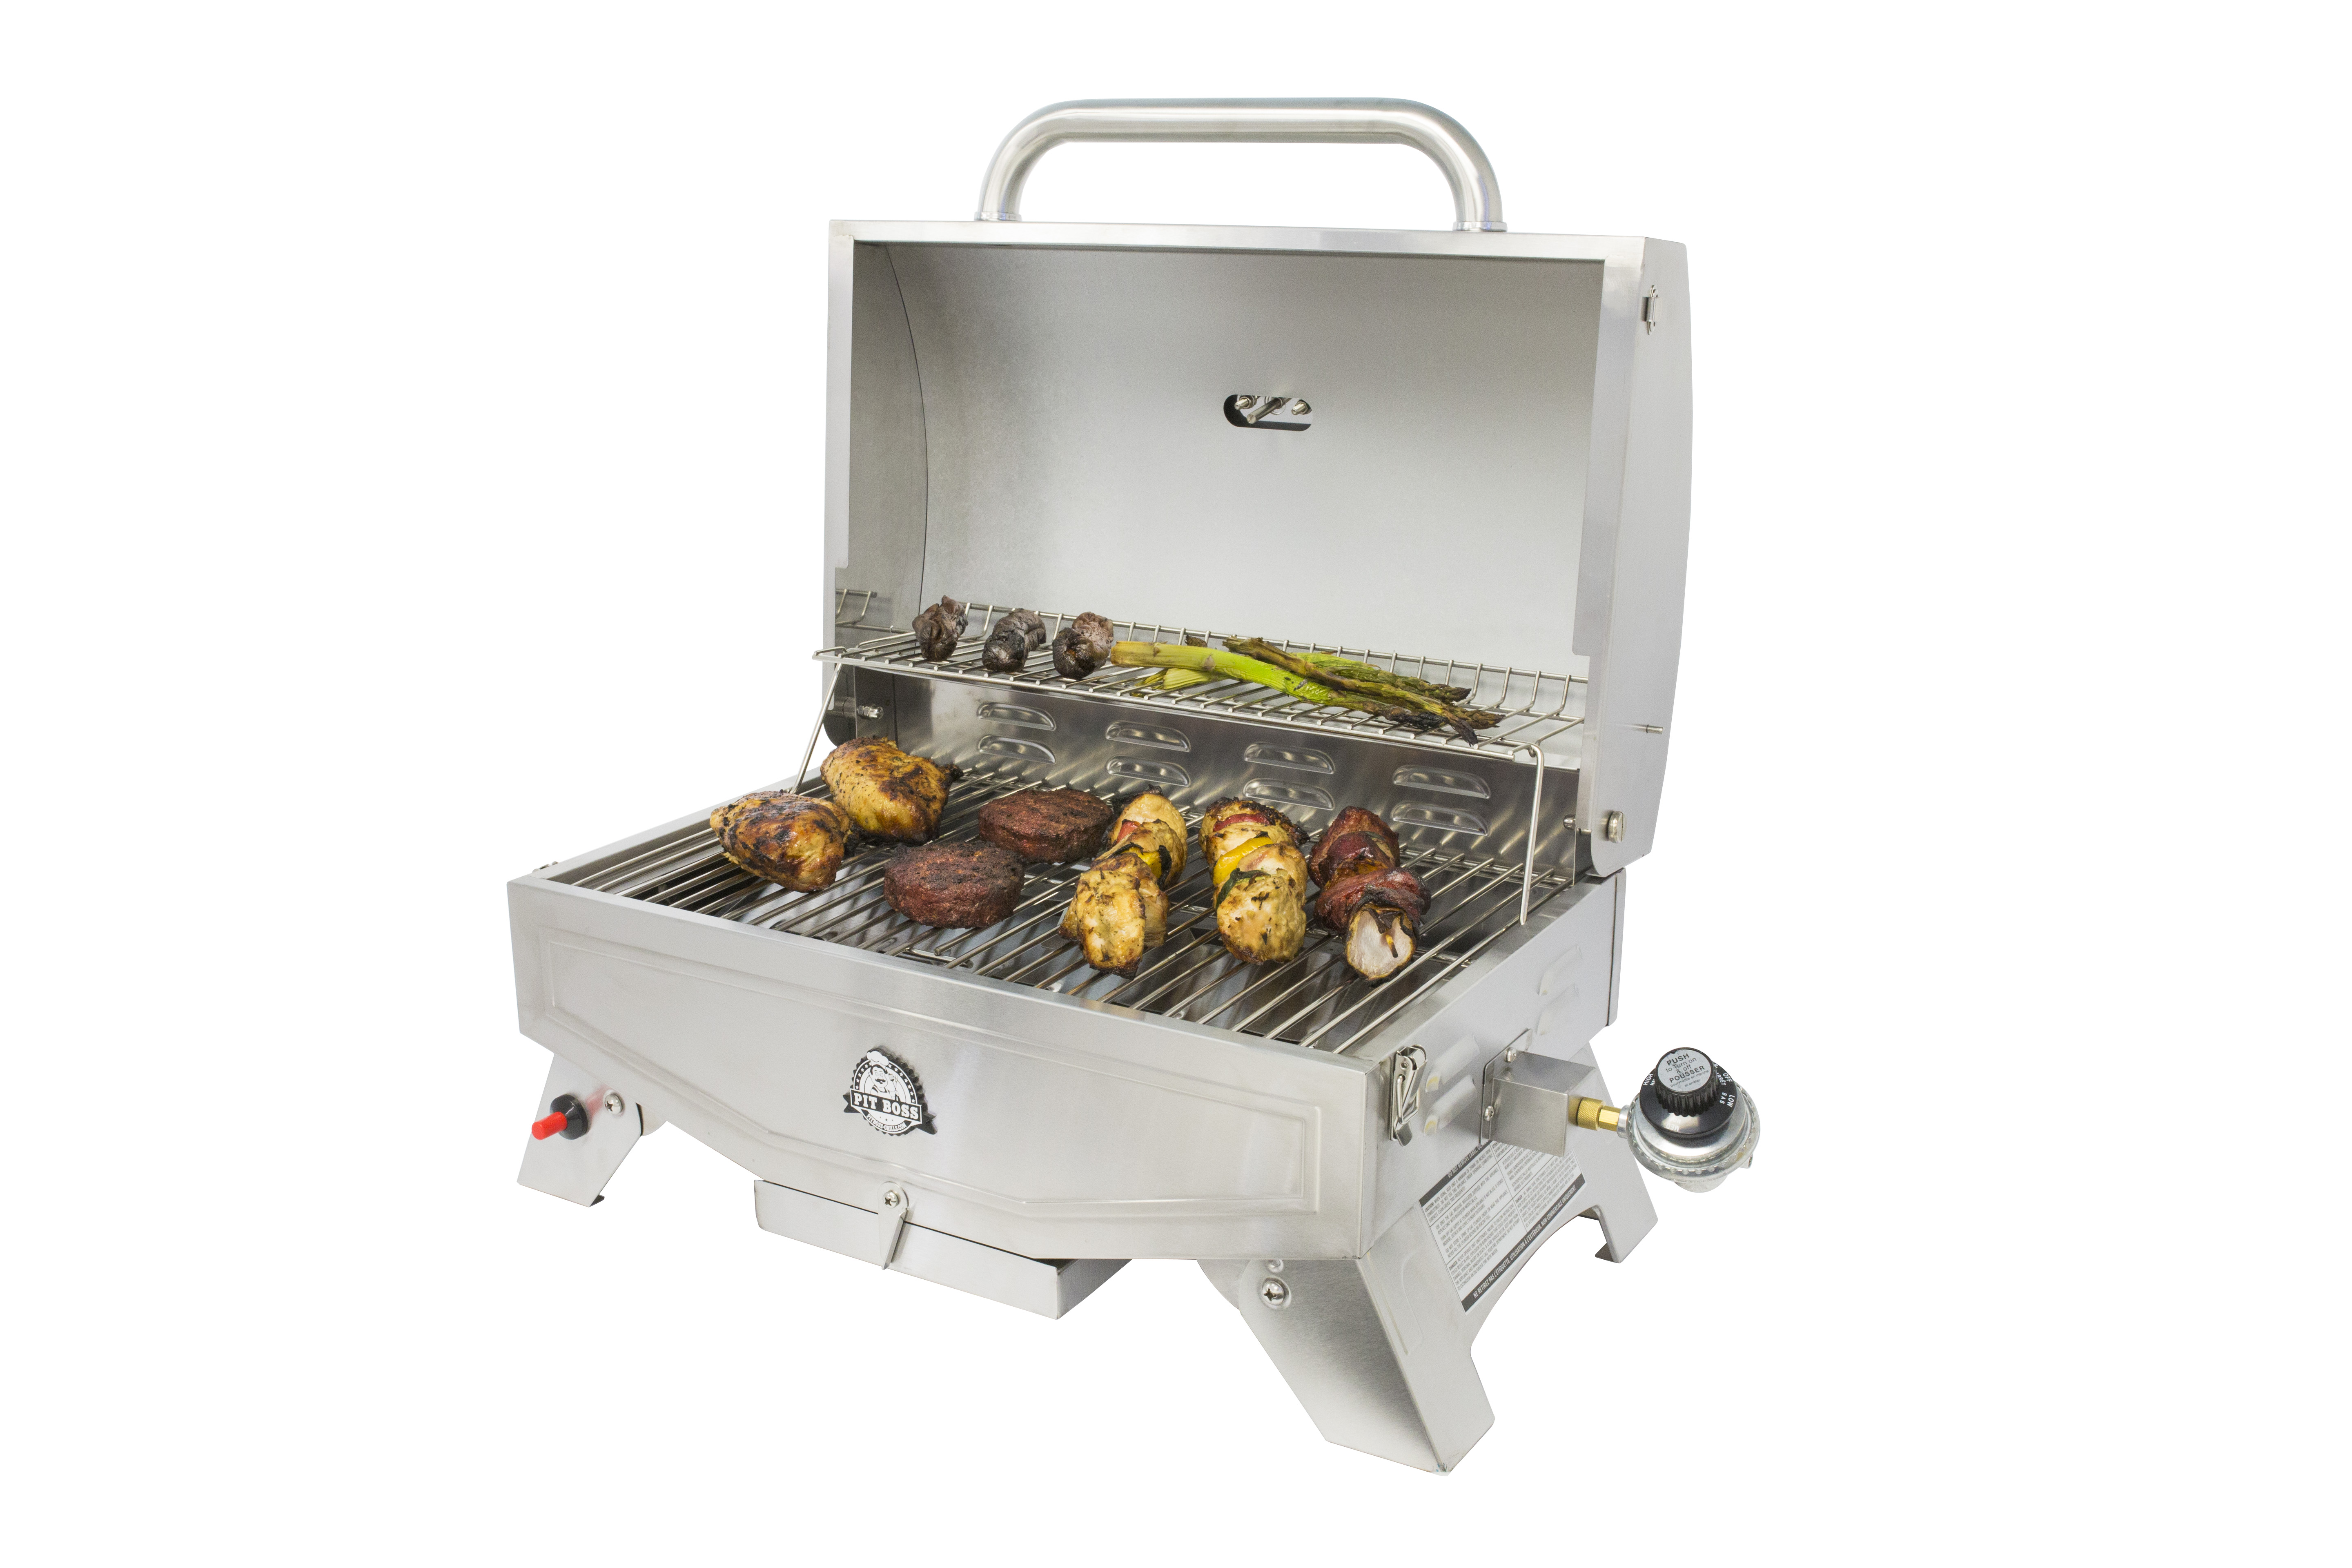 Pit Boss 1 Burner Silver Propane Portable Gas Grill - image 3 of 8